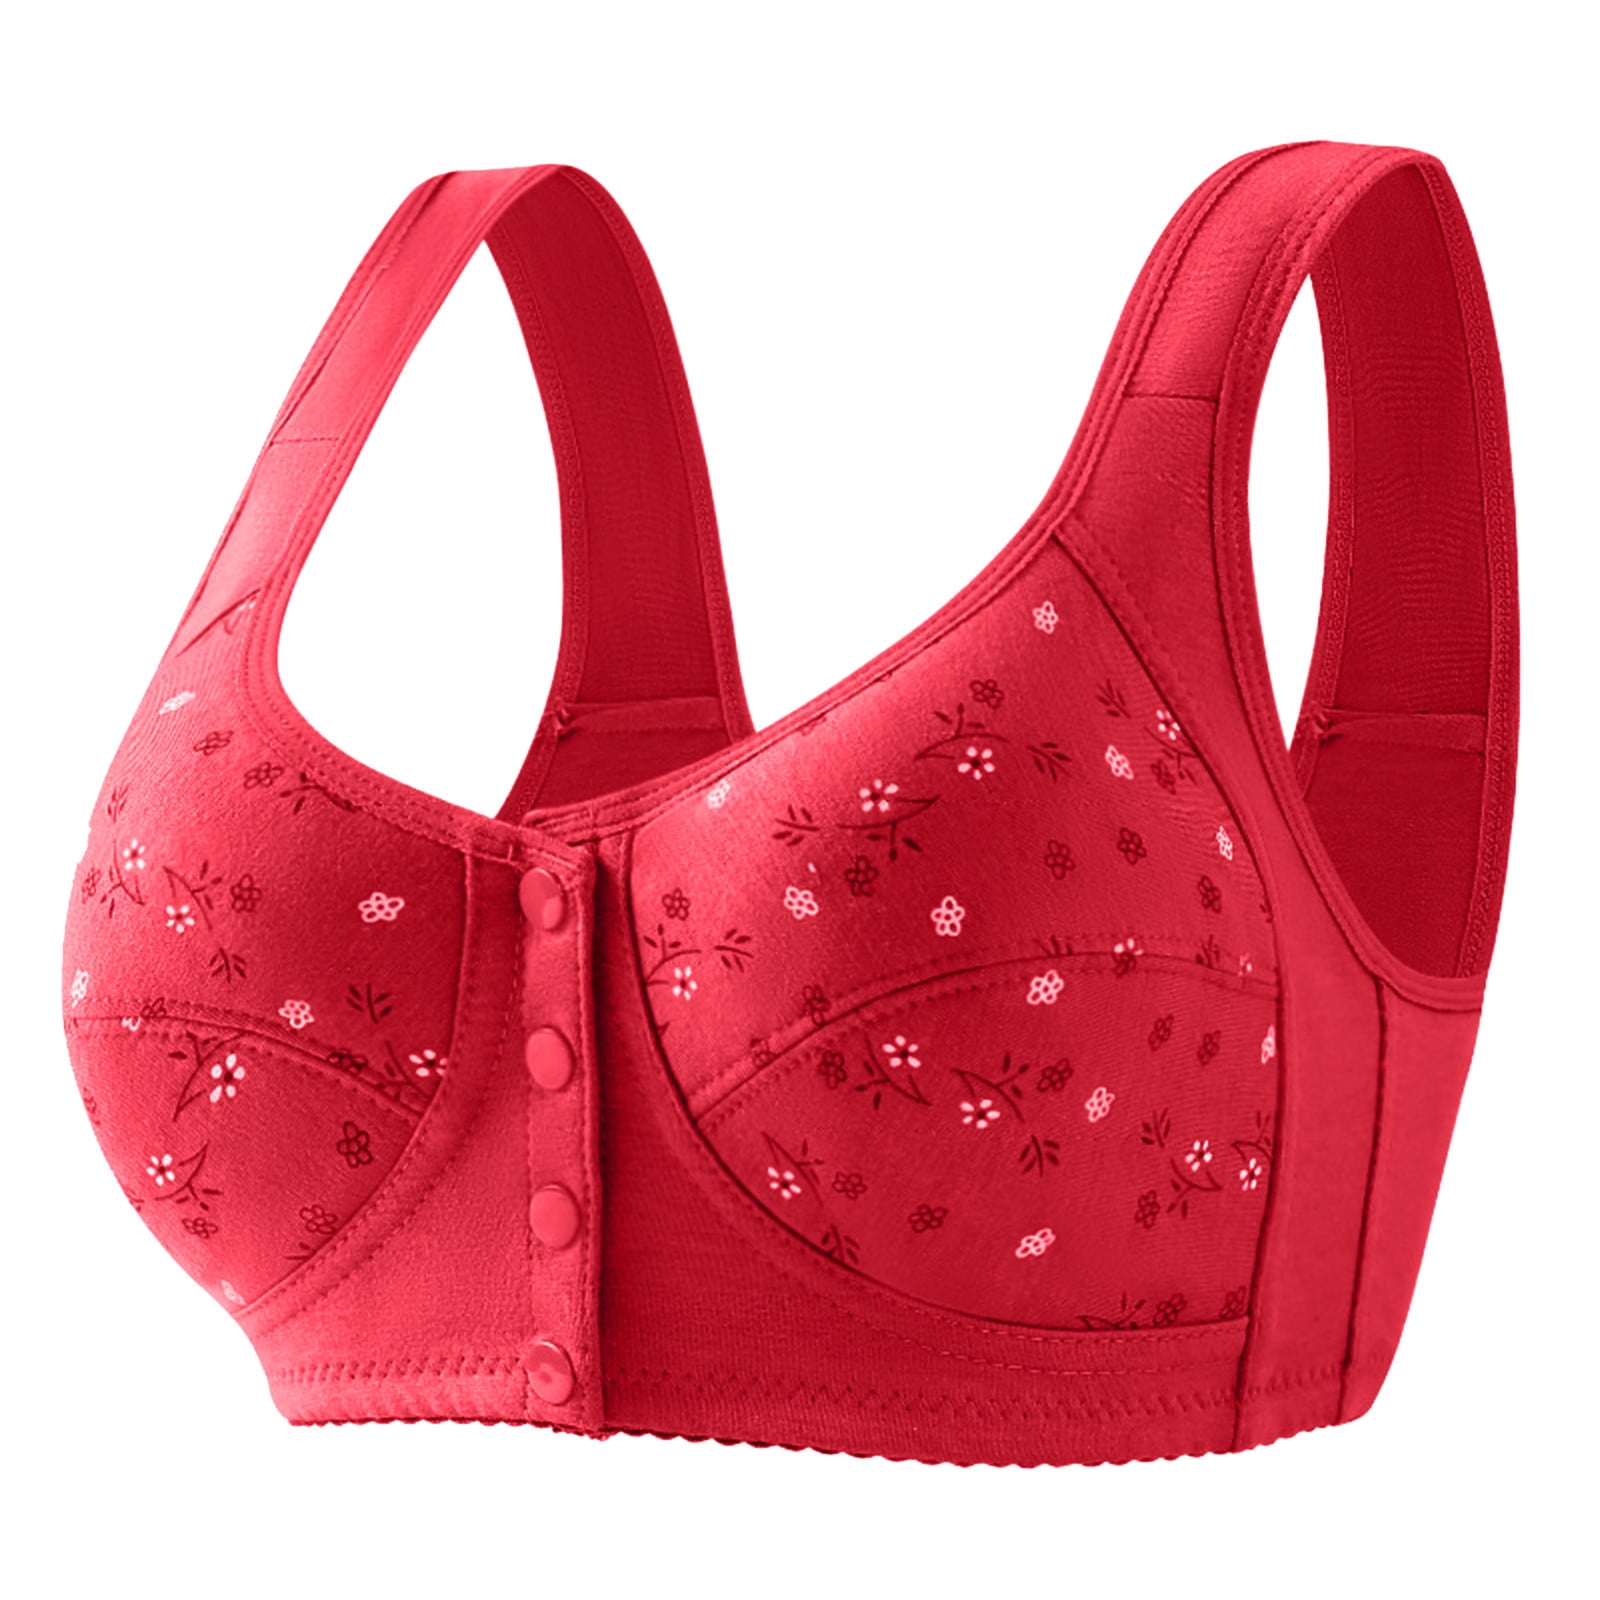 adviicd She Fit Sports Bras Cozy Adjustable Bra Comfort Wirefree Seamless  Bra with Embedded Pad for Women Red 90 